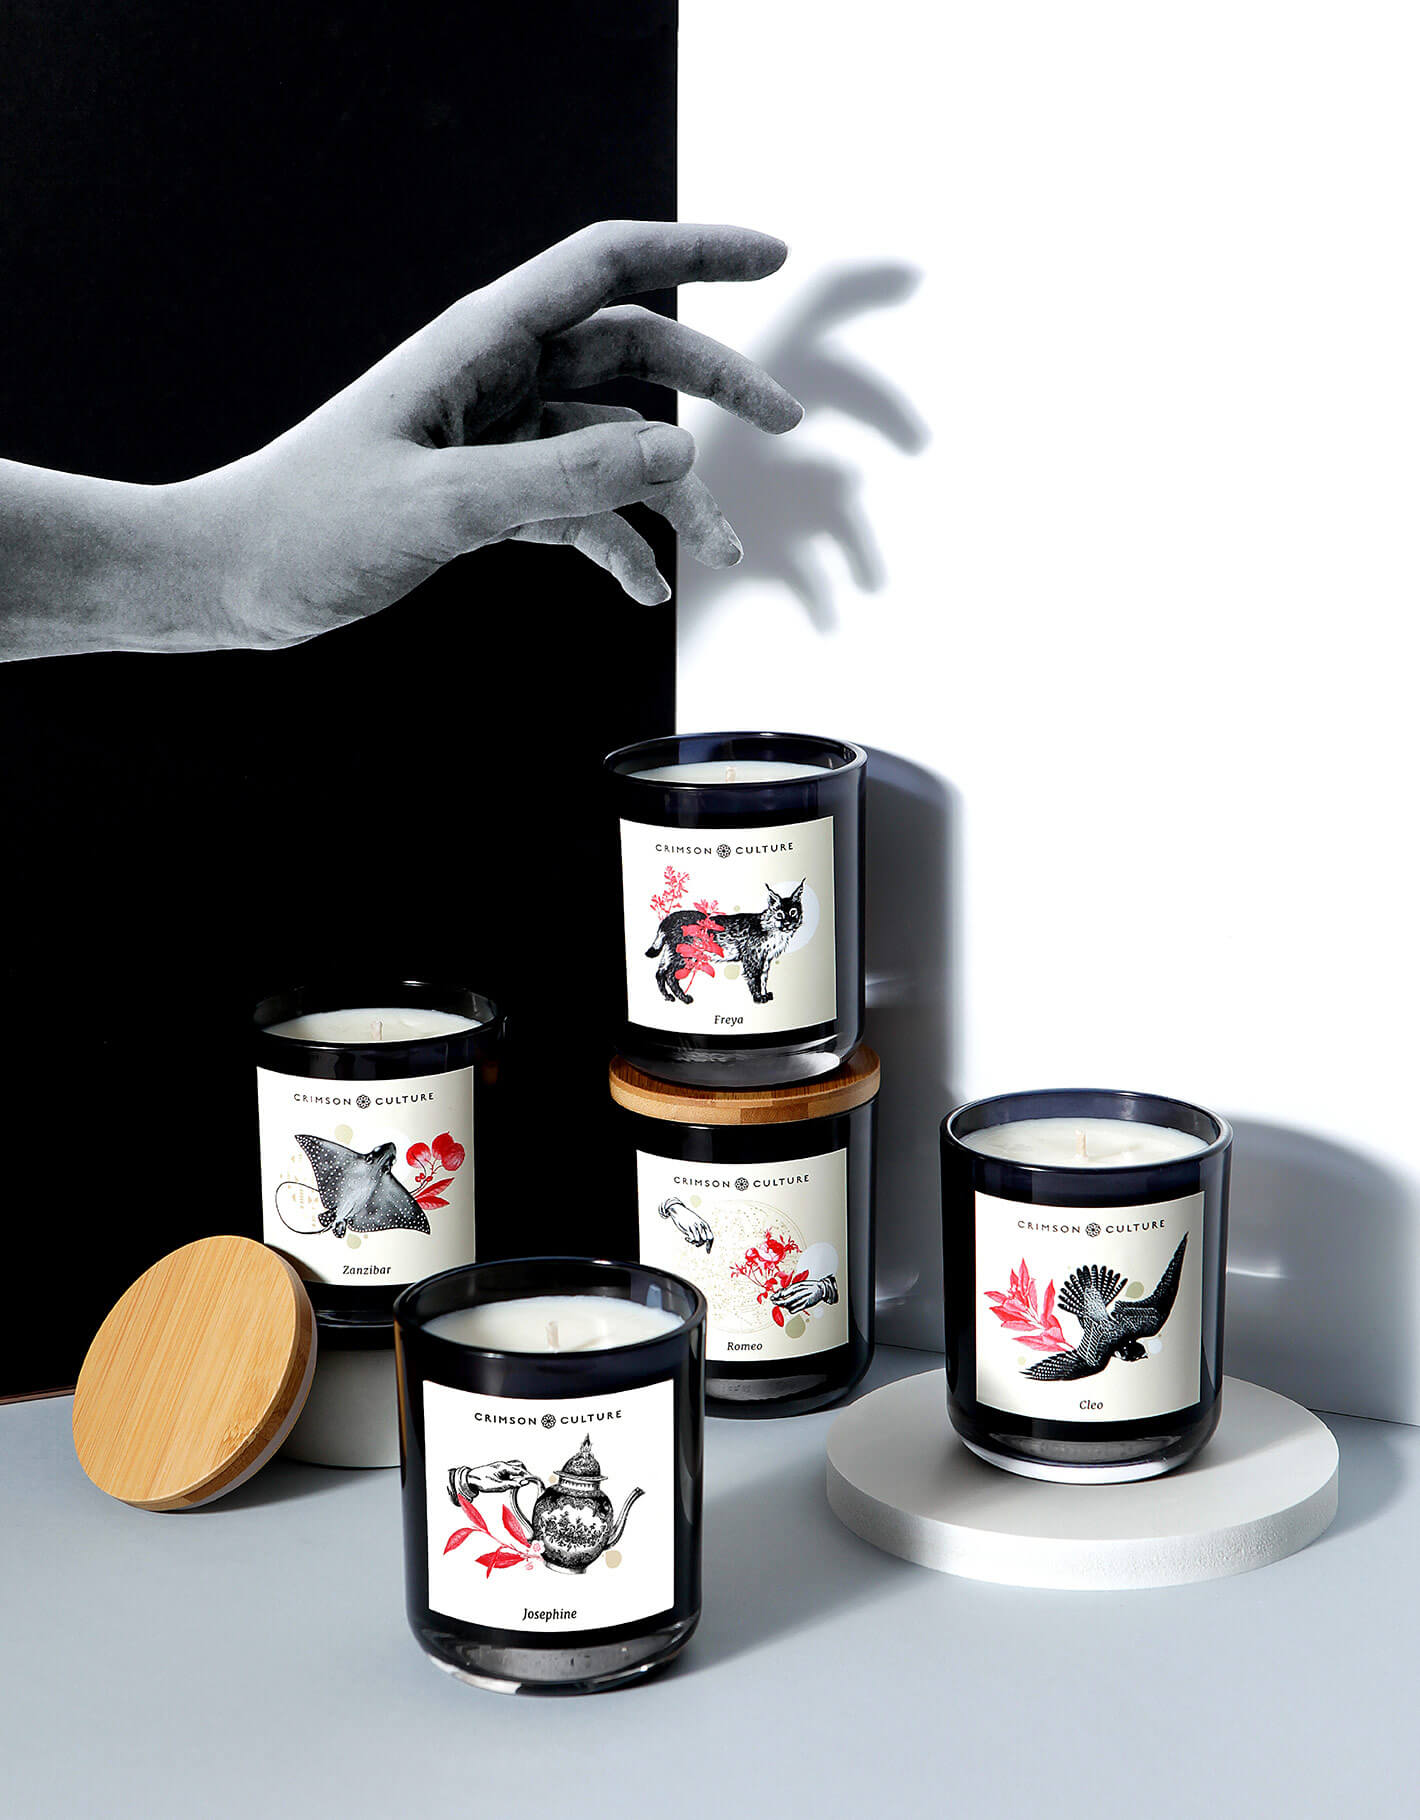 Art directed campaign image showing candle range with new labelling and collaged paper hand interacting with scene